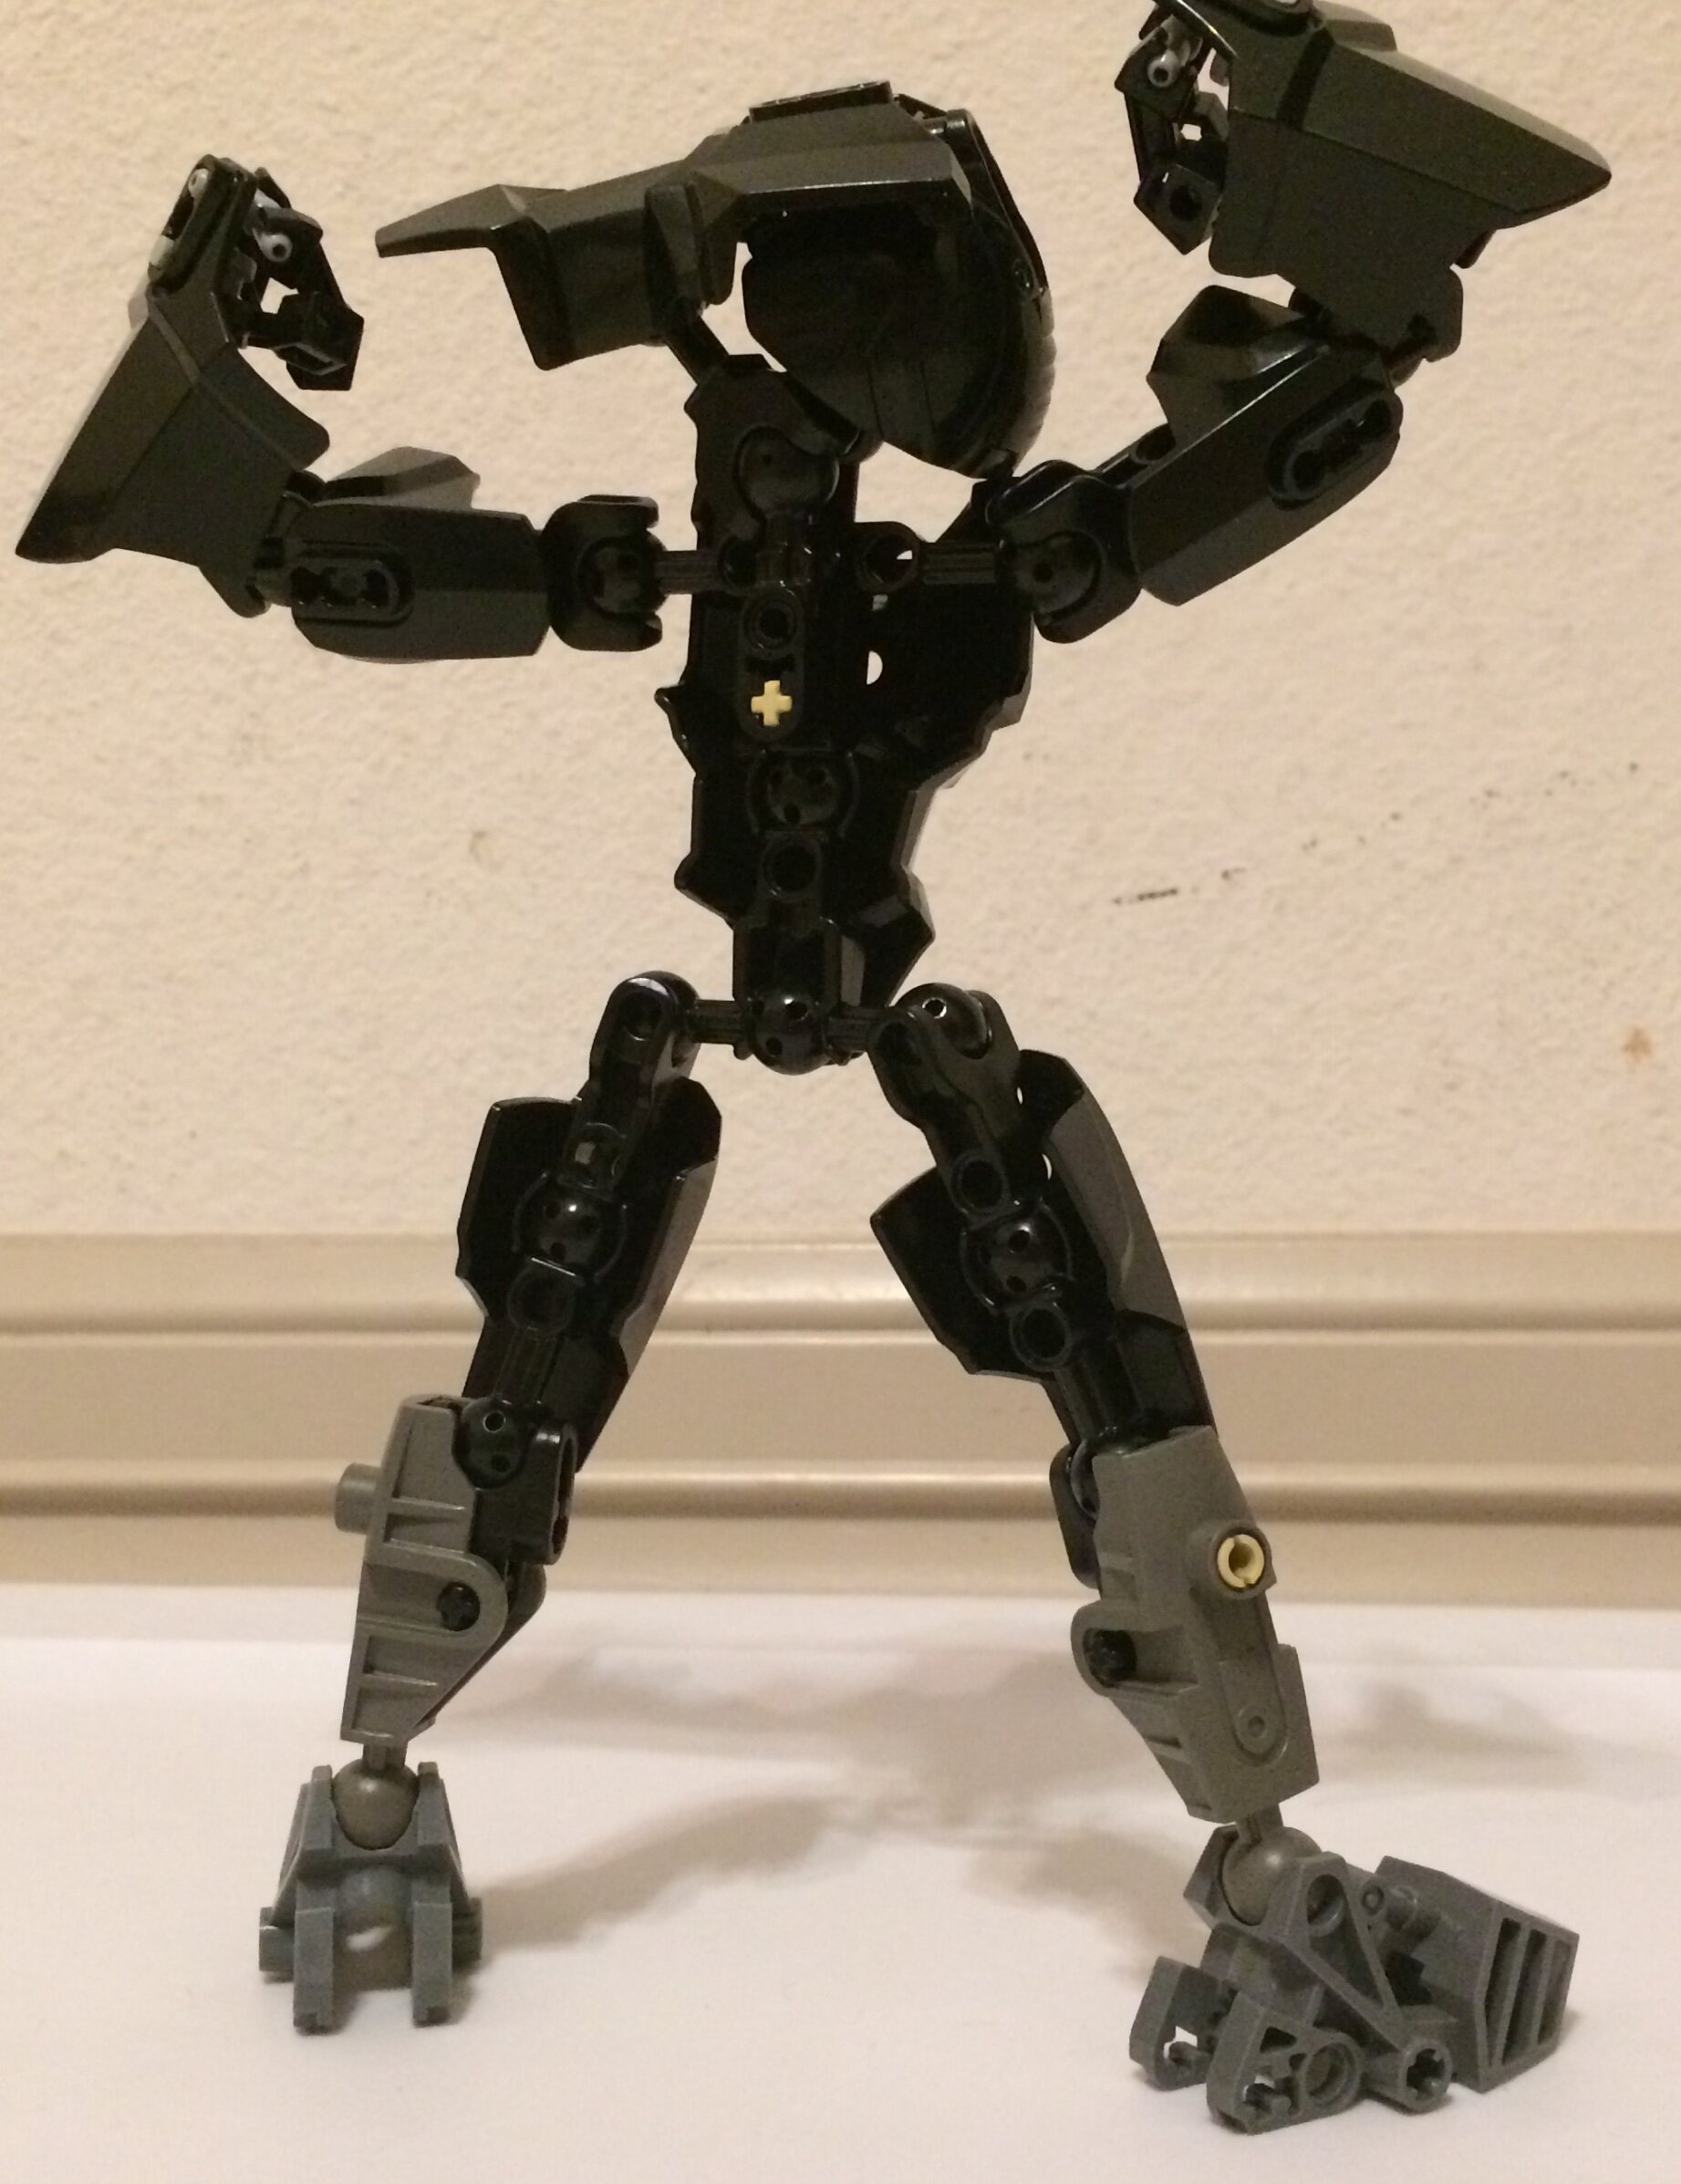 THe arMAtUrE - Lego Creations - The TTV Message Boards